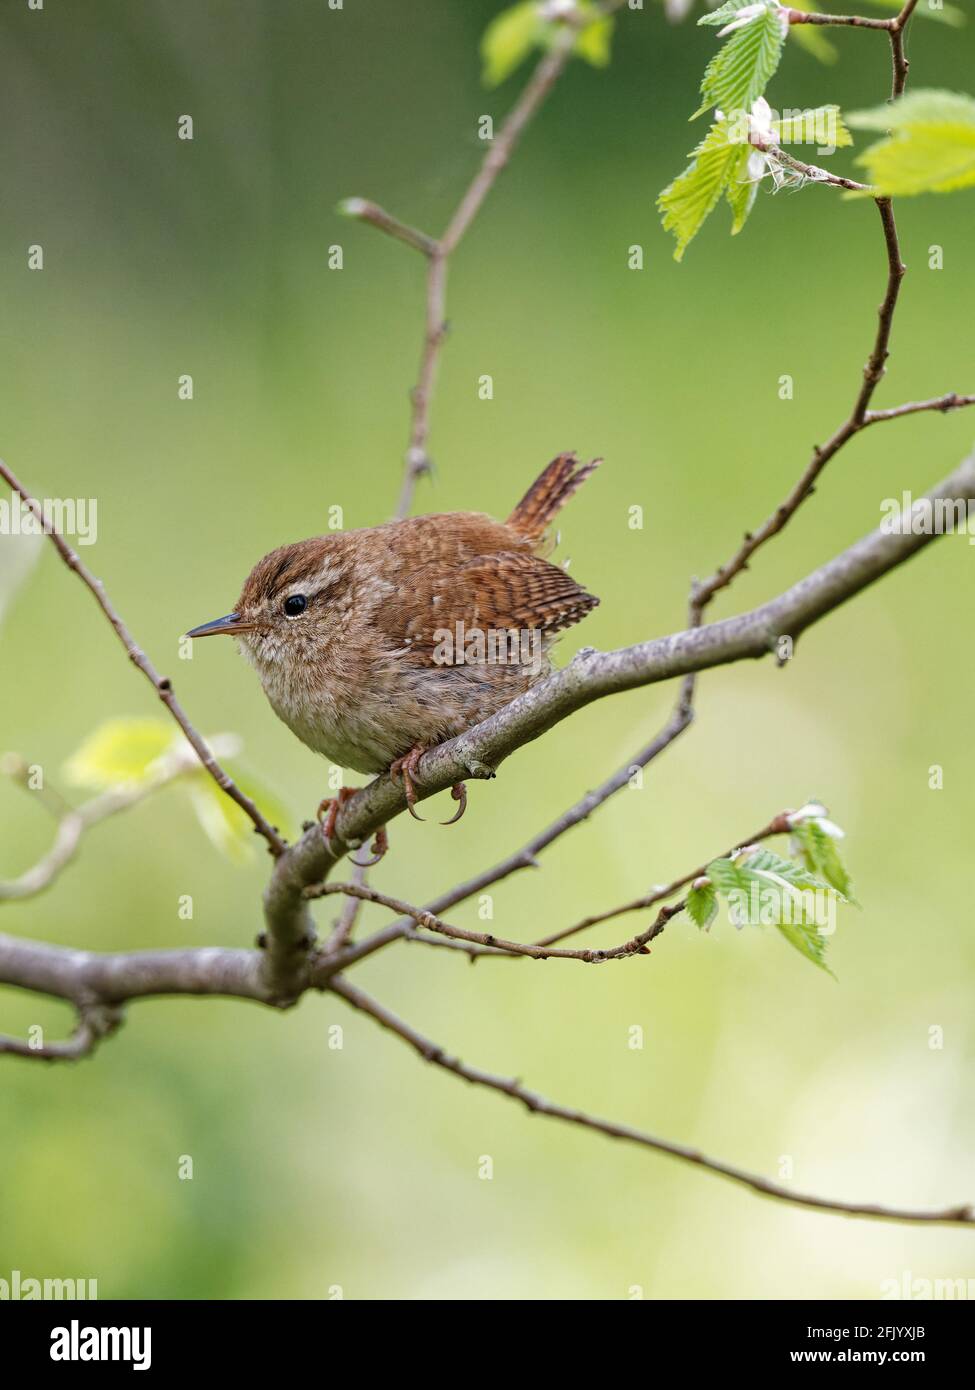 A Wren (Troglodytes troglodytes) perched on a branch against a green background at Big Pool Wood, a Wildlife Trust reserve in Gronant, North Wales. Stock Photo